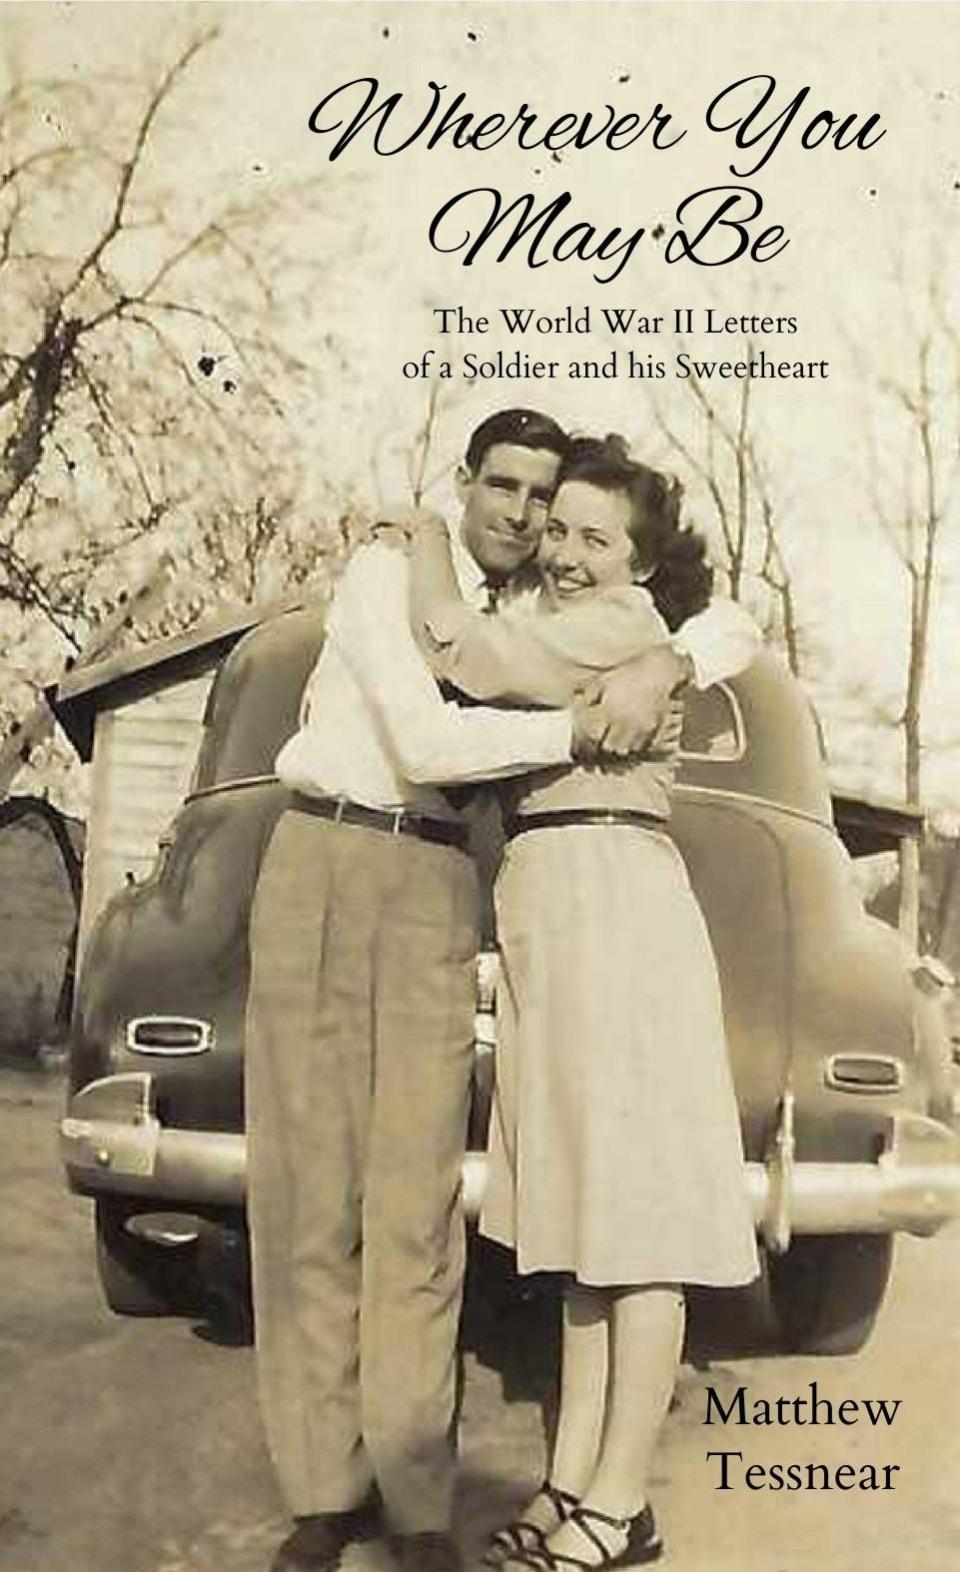 "Wherever You May Be," is a book of love letters written during World War II.